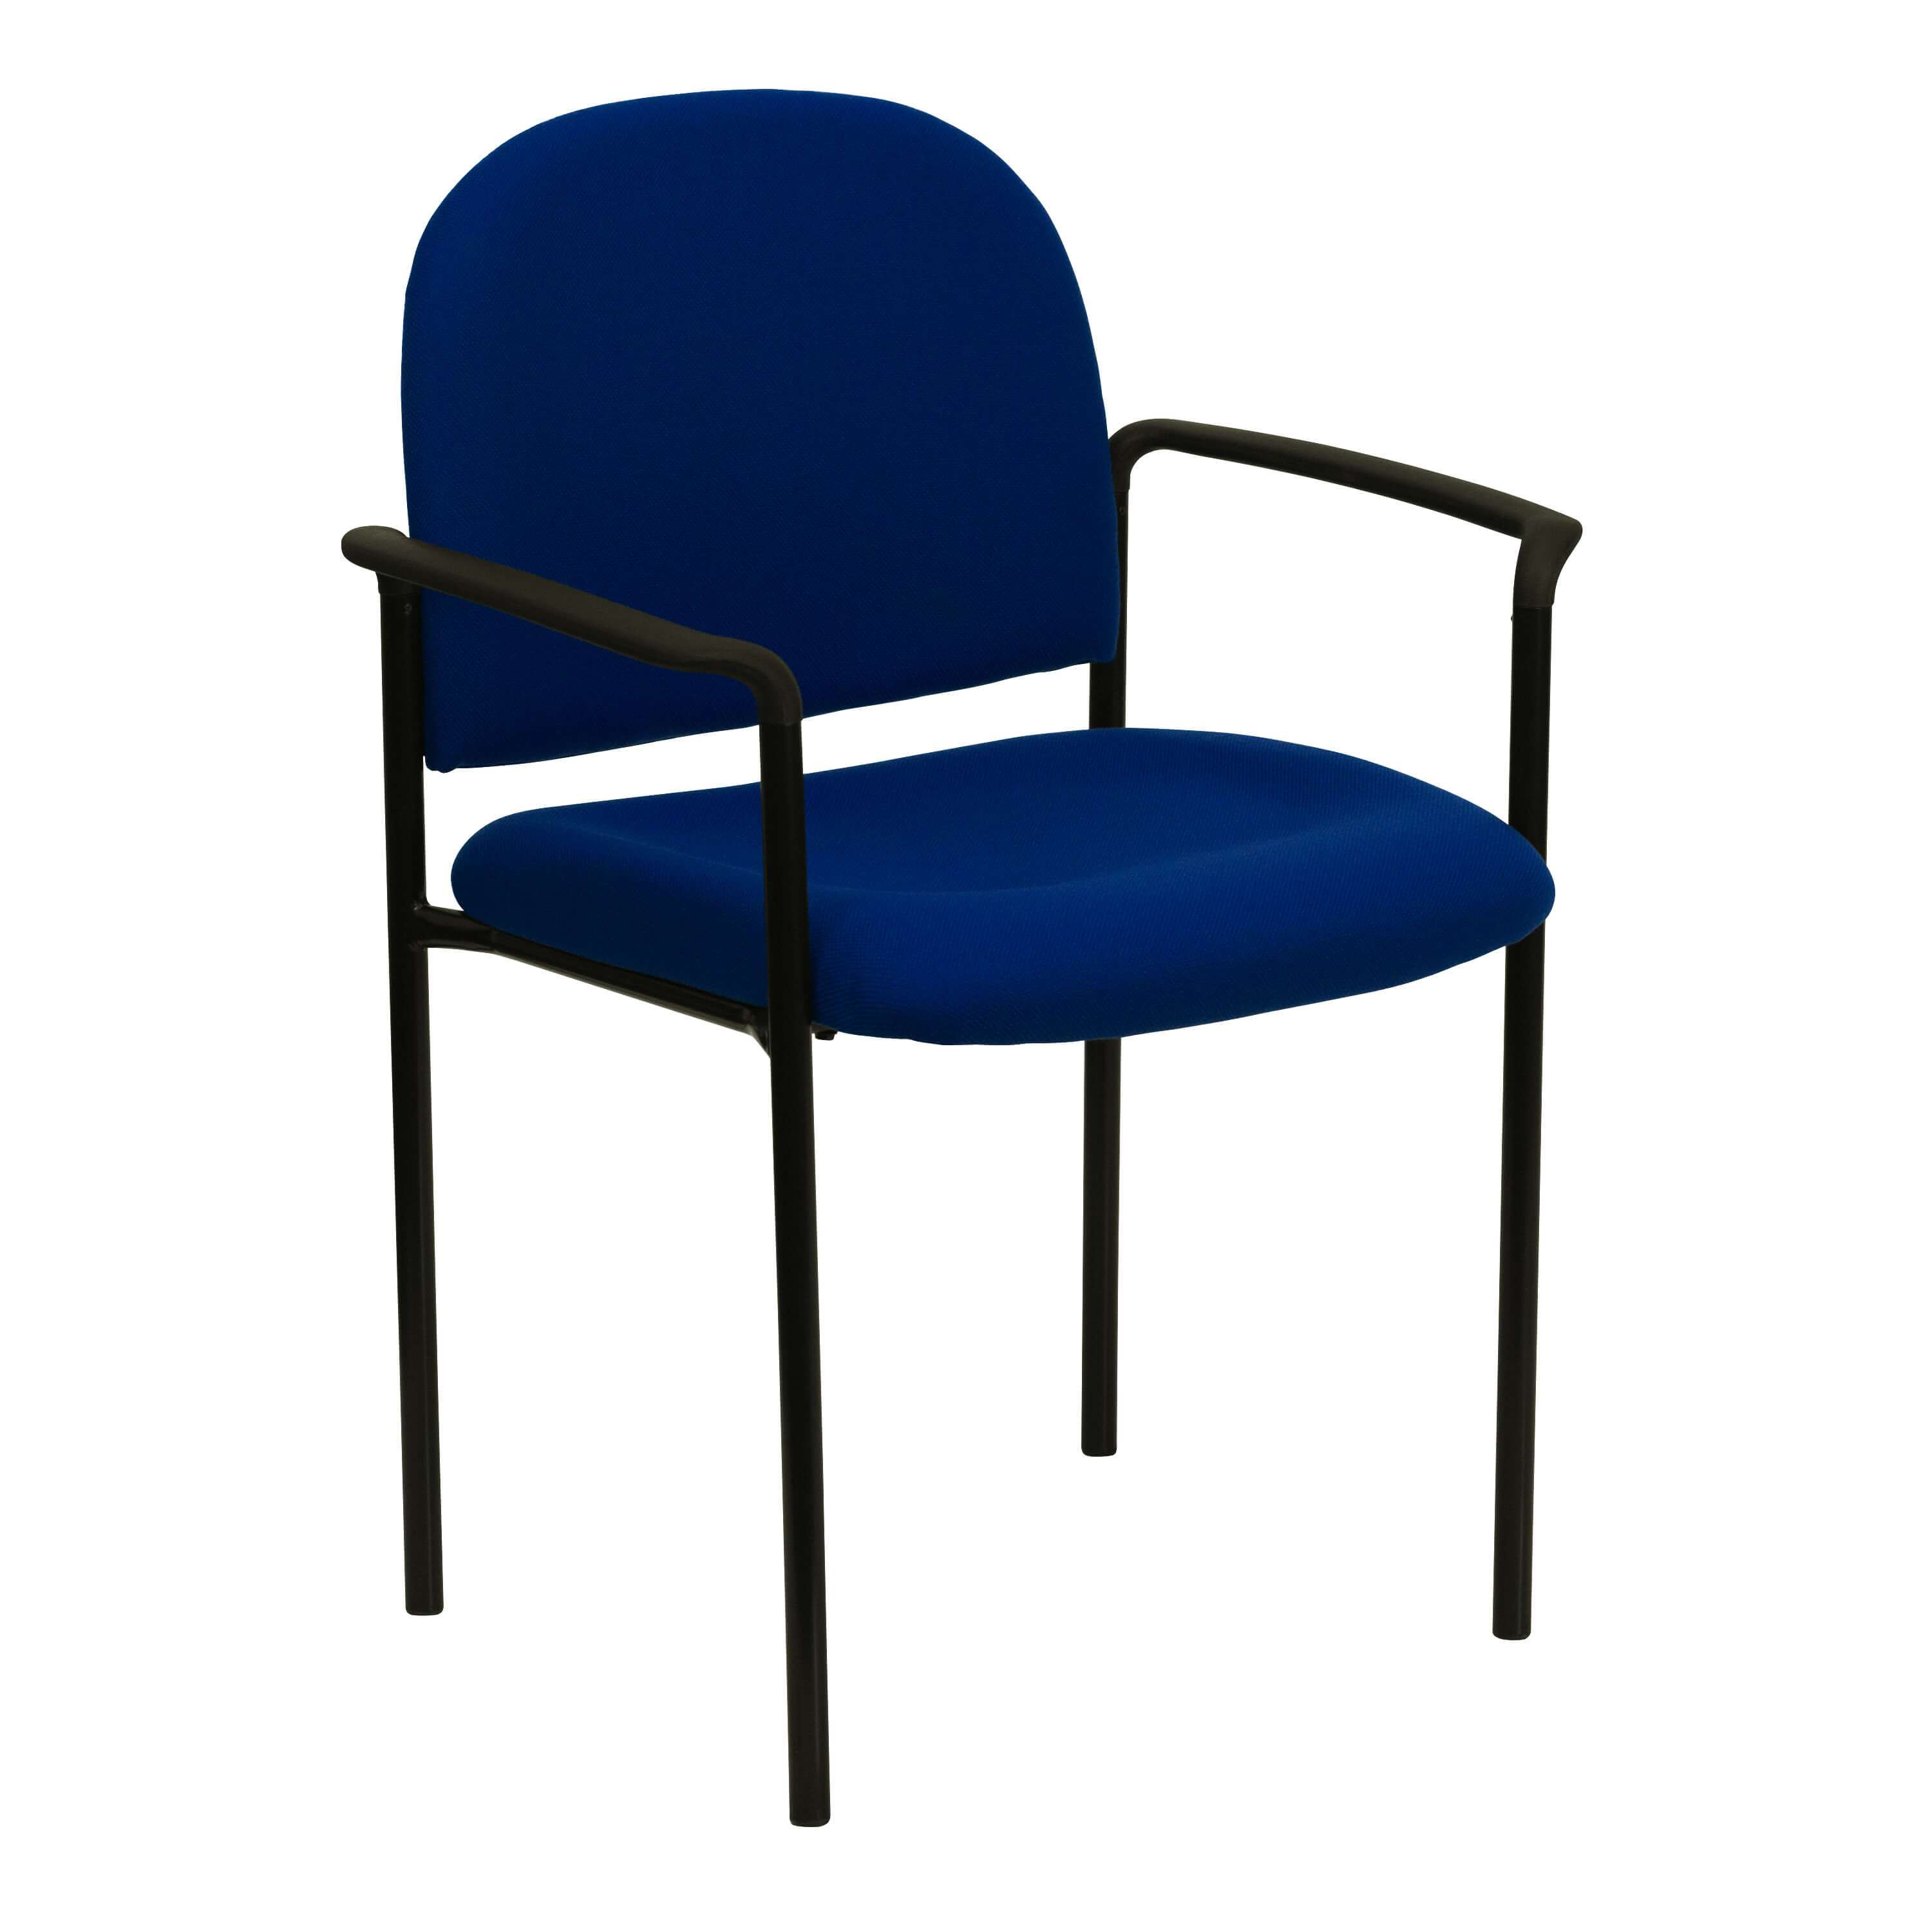 Stackable chairs CUB BT 516 1 NVY GG FLA